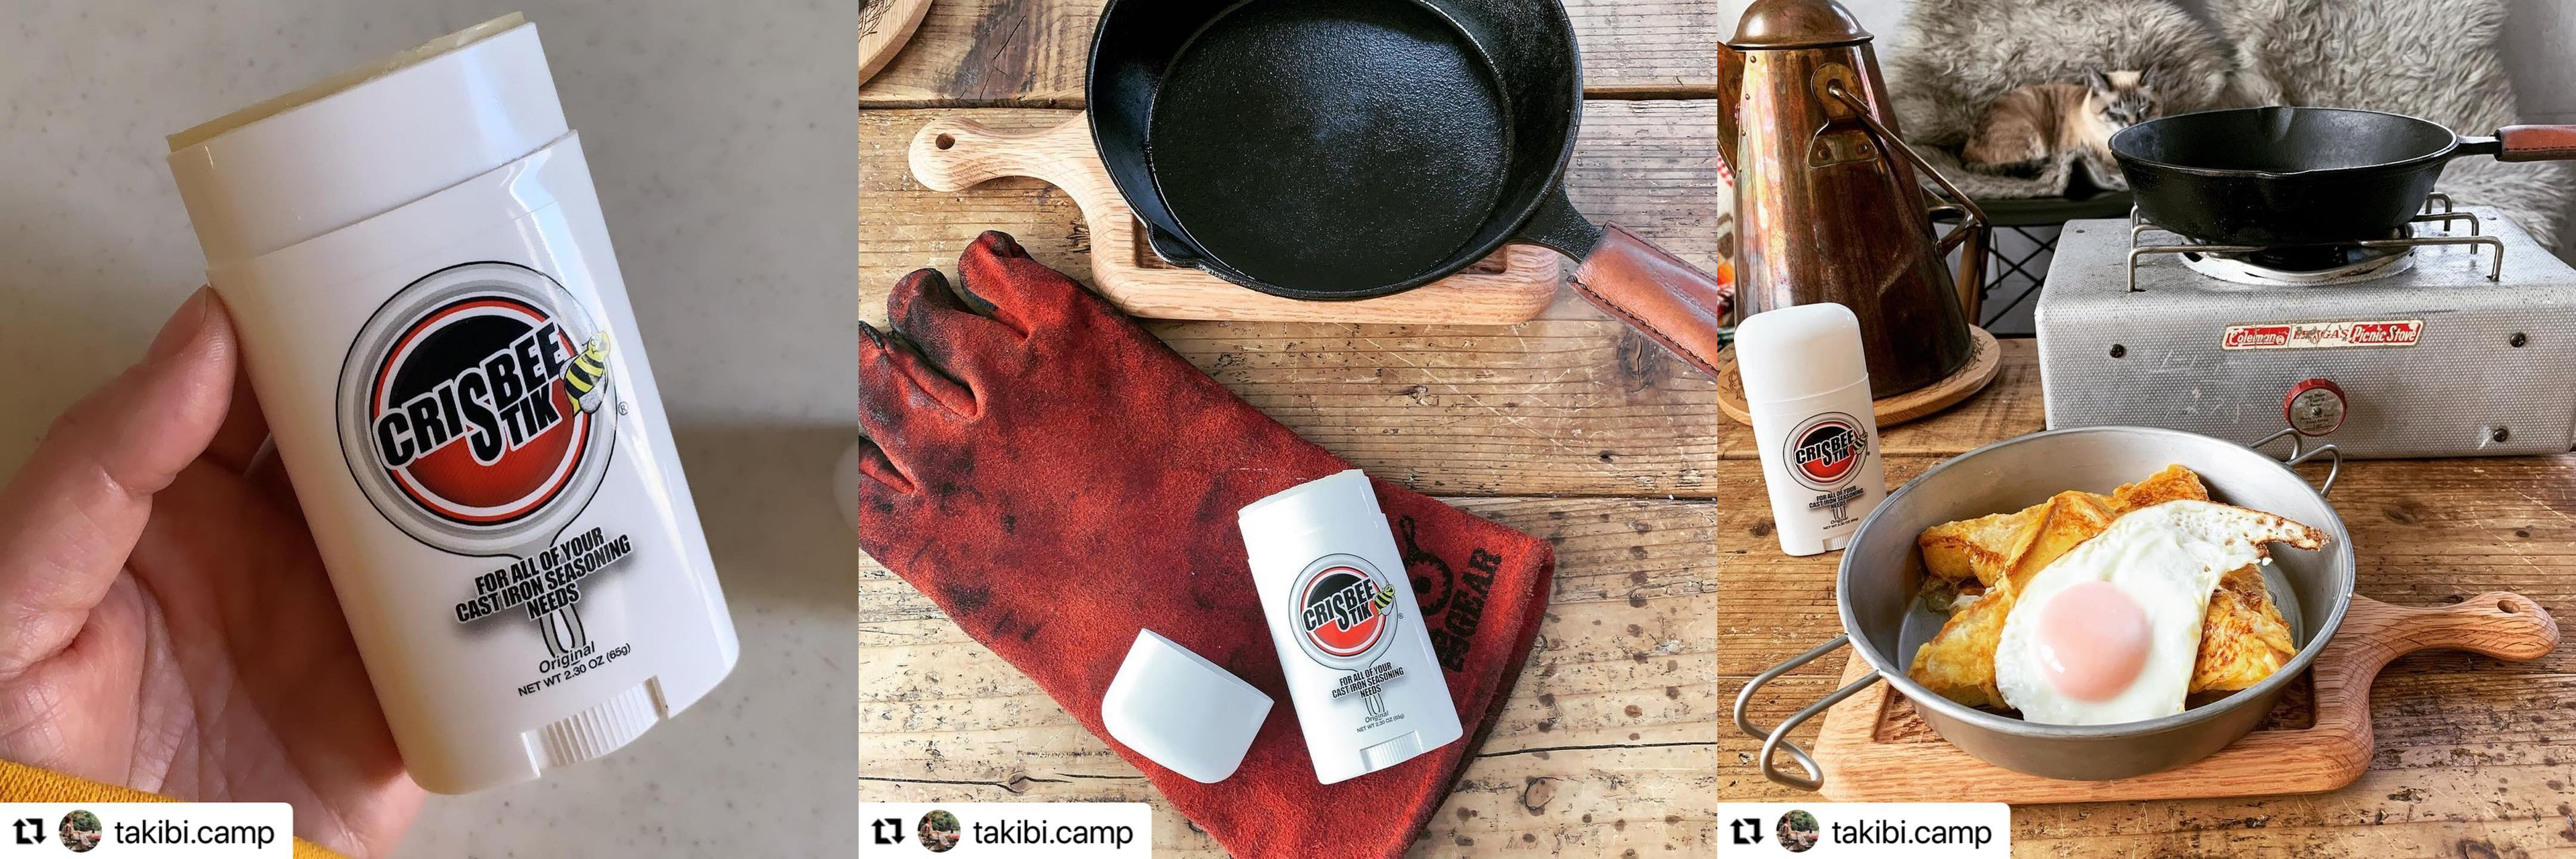 Photos by takibi.camp of their Crisbee Stik camp cooking with their cast iron skillet in Japan